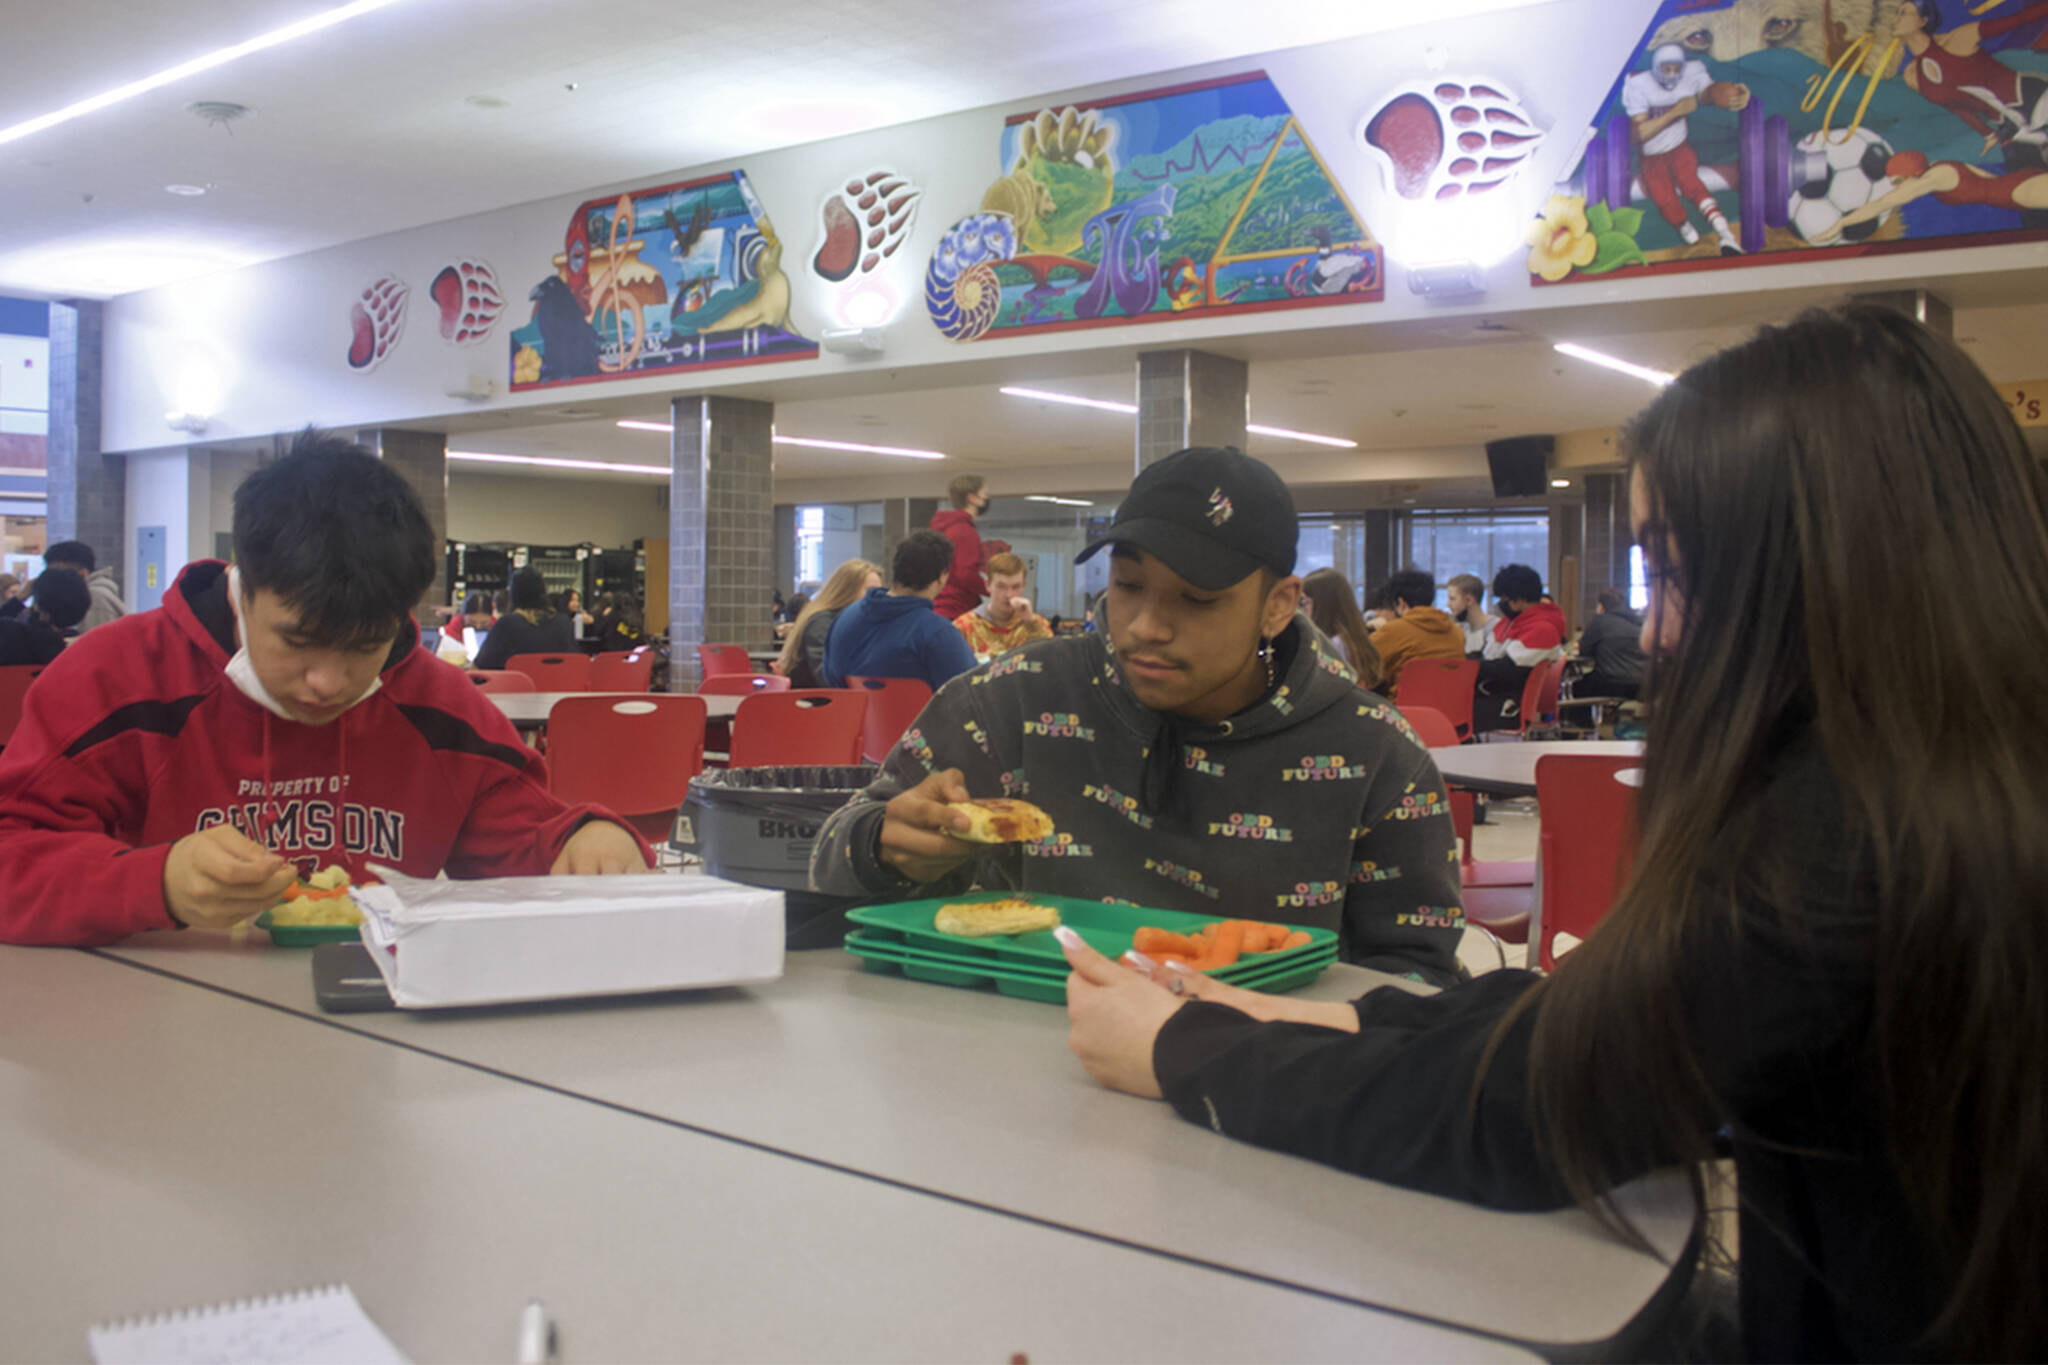 A.J. Wilson, 17, DeAndre Pittman, 16, and Elora Johnson, 16, eat lunch Thursday in the Juneau-Douglas High School: Yadaa.at Kalé cafeteria. They, like many students, agree the free meals available during the pandemic are worth continuing if funding can be found after it ends June 30, but they are likely to look off-campus for food if they are required to pay for school lunches again. (Mark Sabbatini / Juneau Empire)